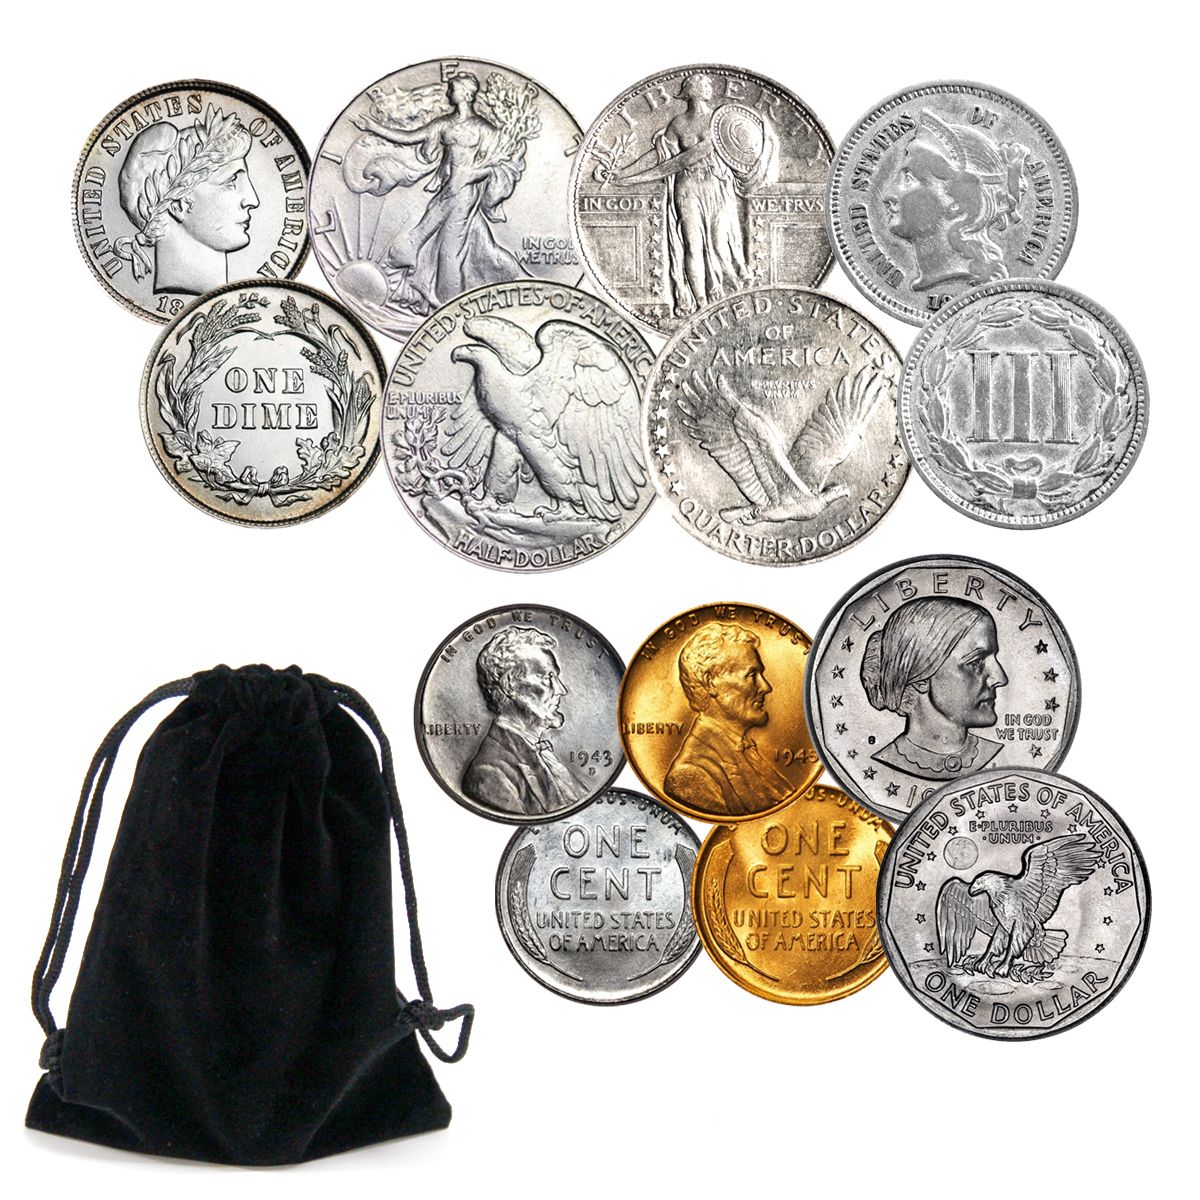 Coin Collecting Kit - Includes Rare Coins for Your Coin Collection